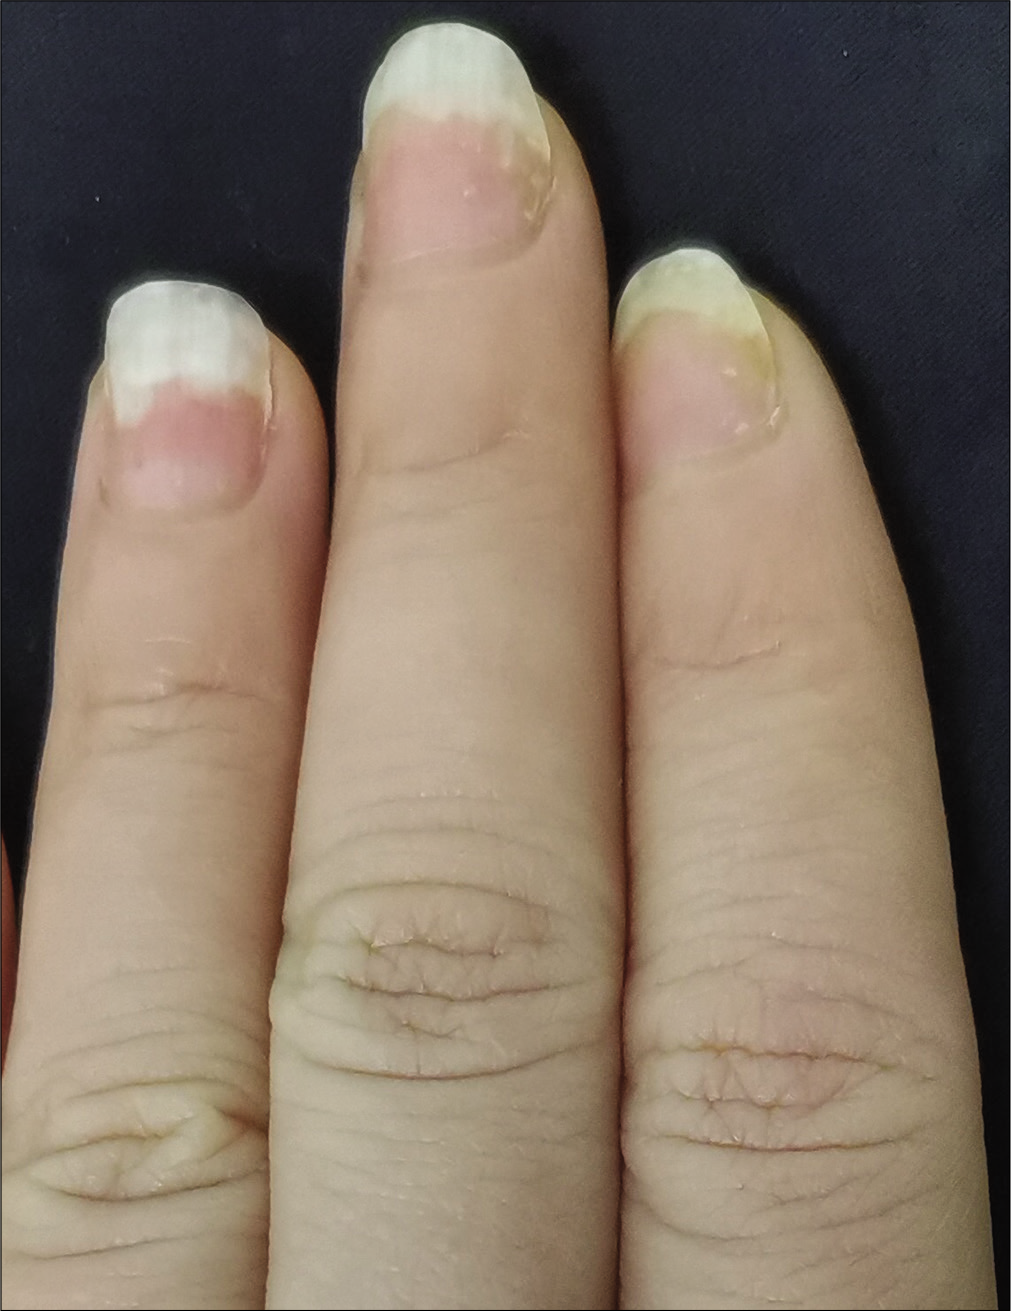 Intramatricial low-dose secukinumab injection for nail psoriasis ...